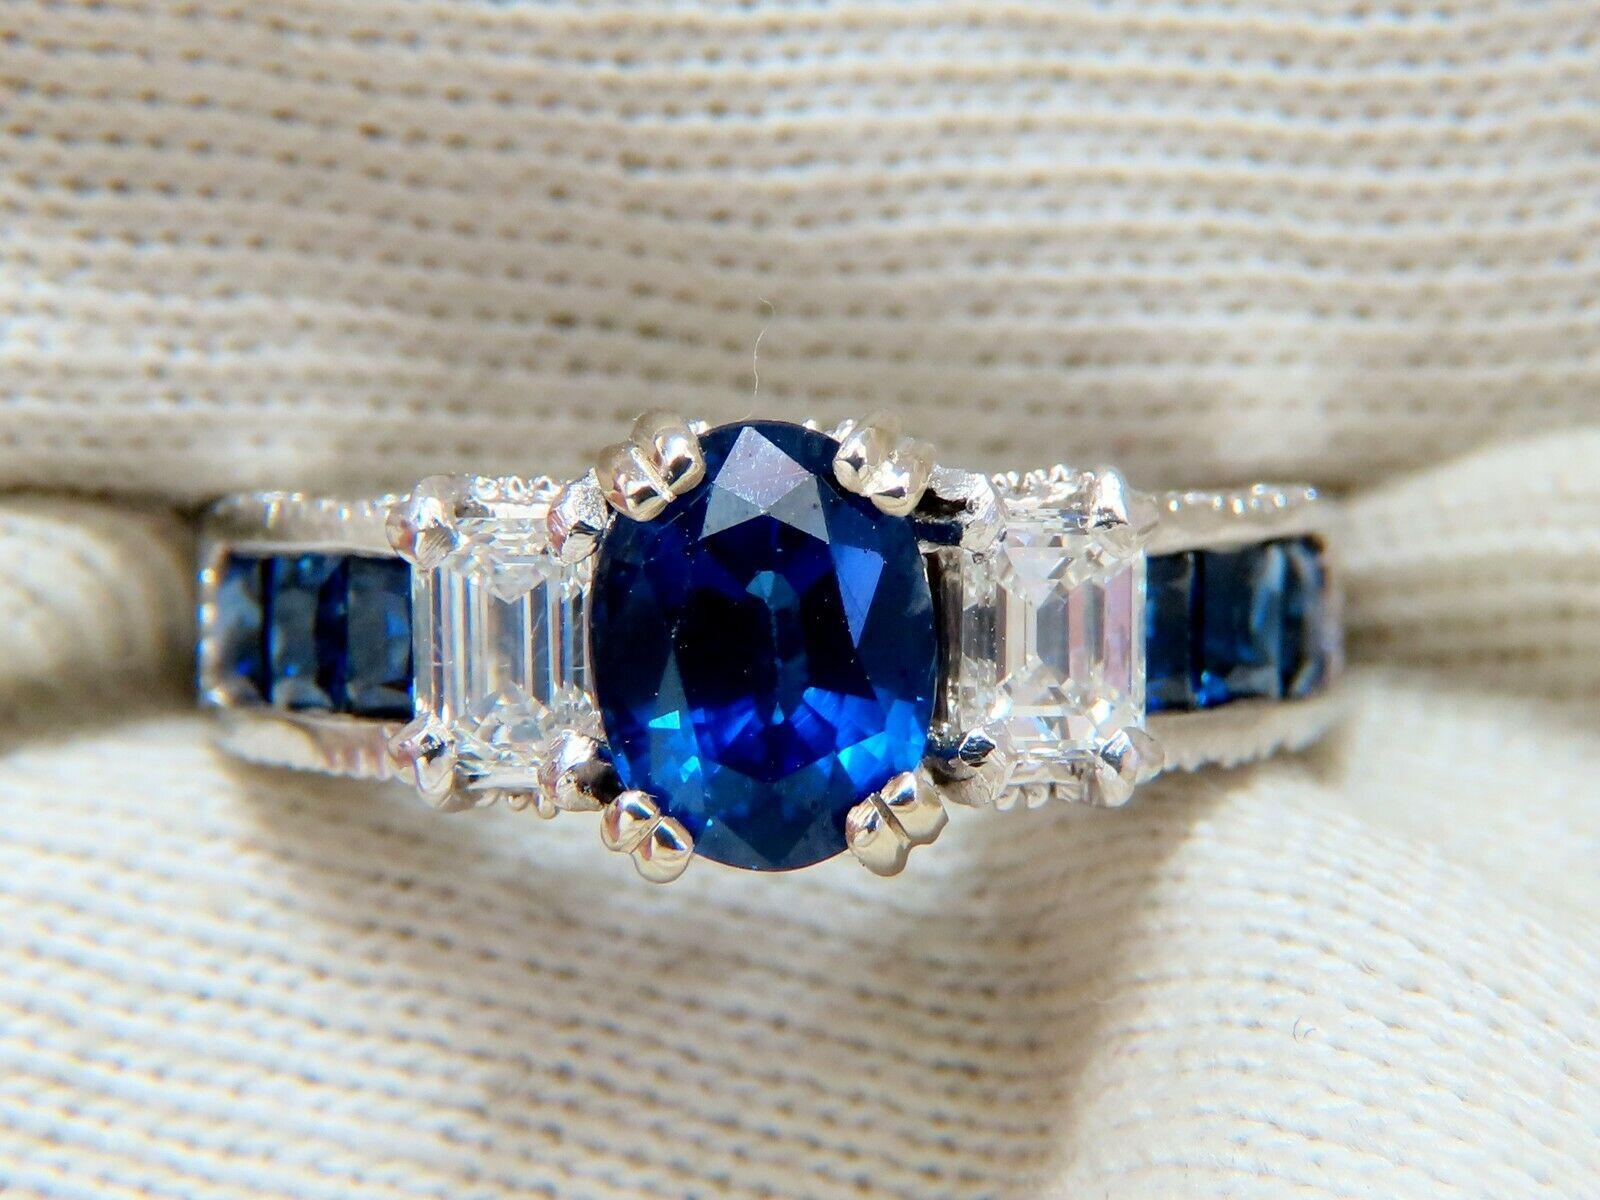 Blue, Princess & Band

GIA Certified 1.86ct. Natural Blue Sapphire ring

Heat, Natural

GIA Certified Report ID: 2193782925

7.69 X 5.90 X 4.65mm

Full Oval Brilliant 

Clean Clarity & Transparent

Classic Royal Blue

.62ct Side emerald cut diamonds